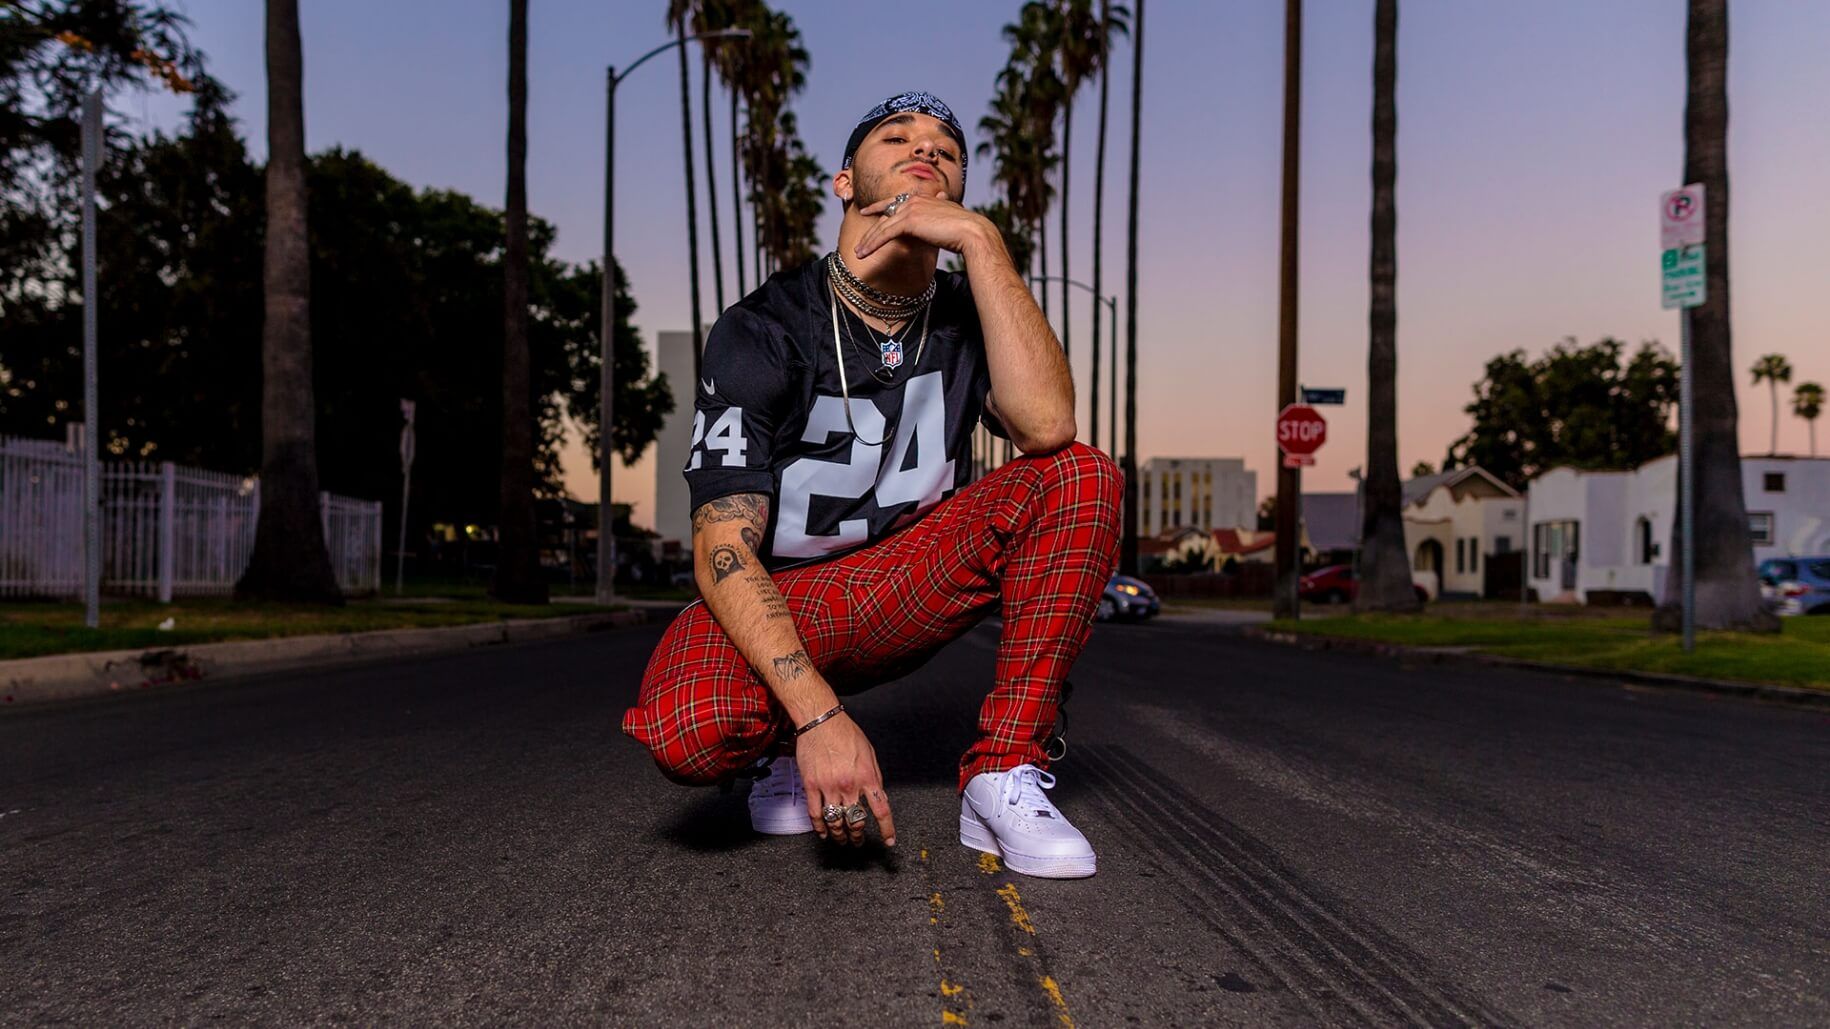 Man kneeling posing in palm tree lined street at dusk wearing number 24 Raiders football jersey, necklaces and plaid pants